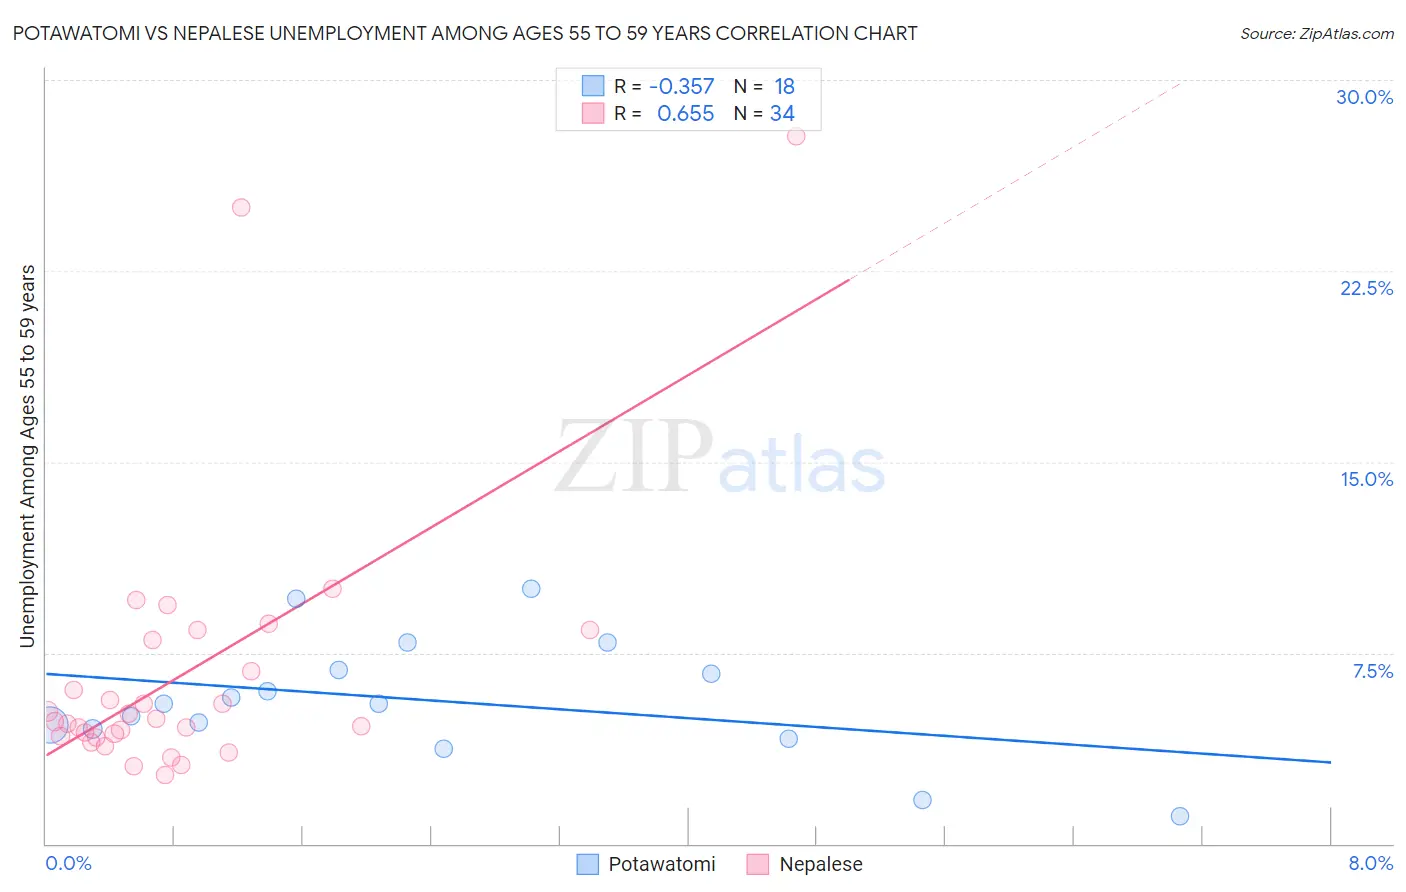 Potawatomi vs Nepalese Unemployment Among Ages 55 to 59 years